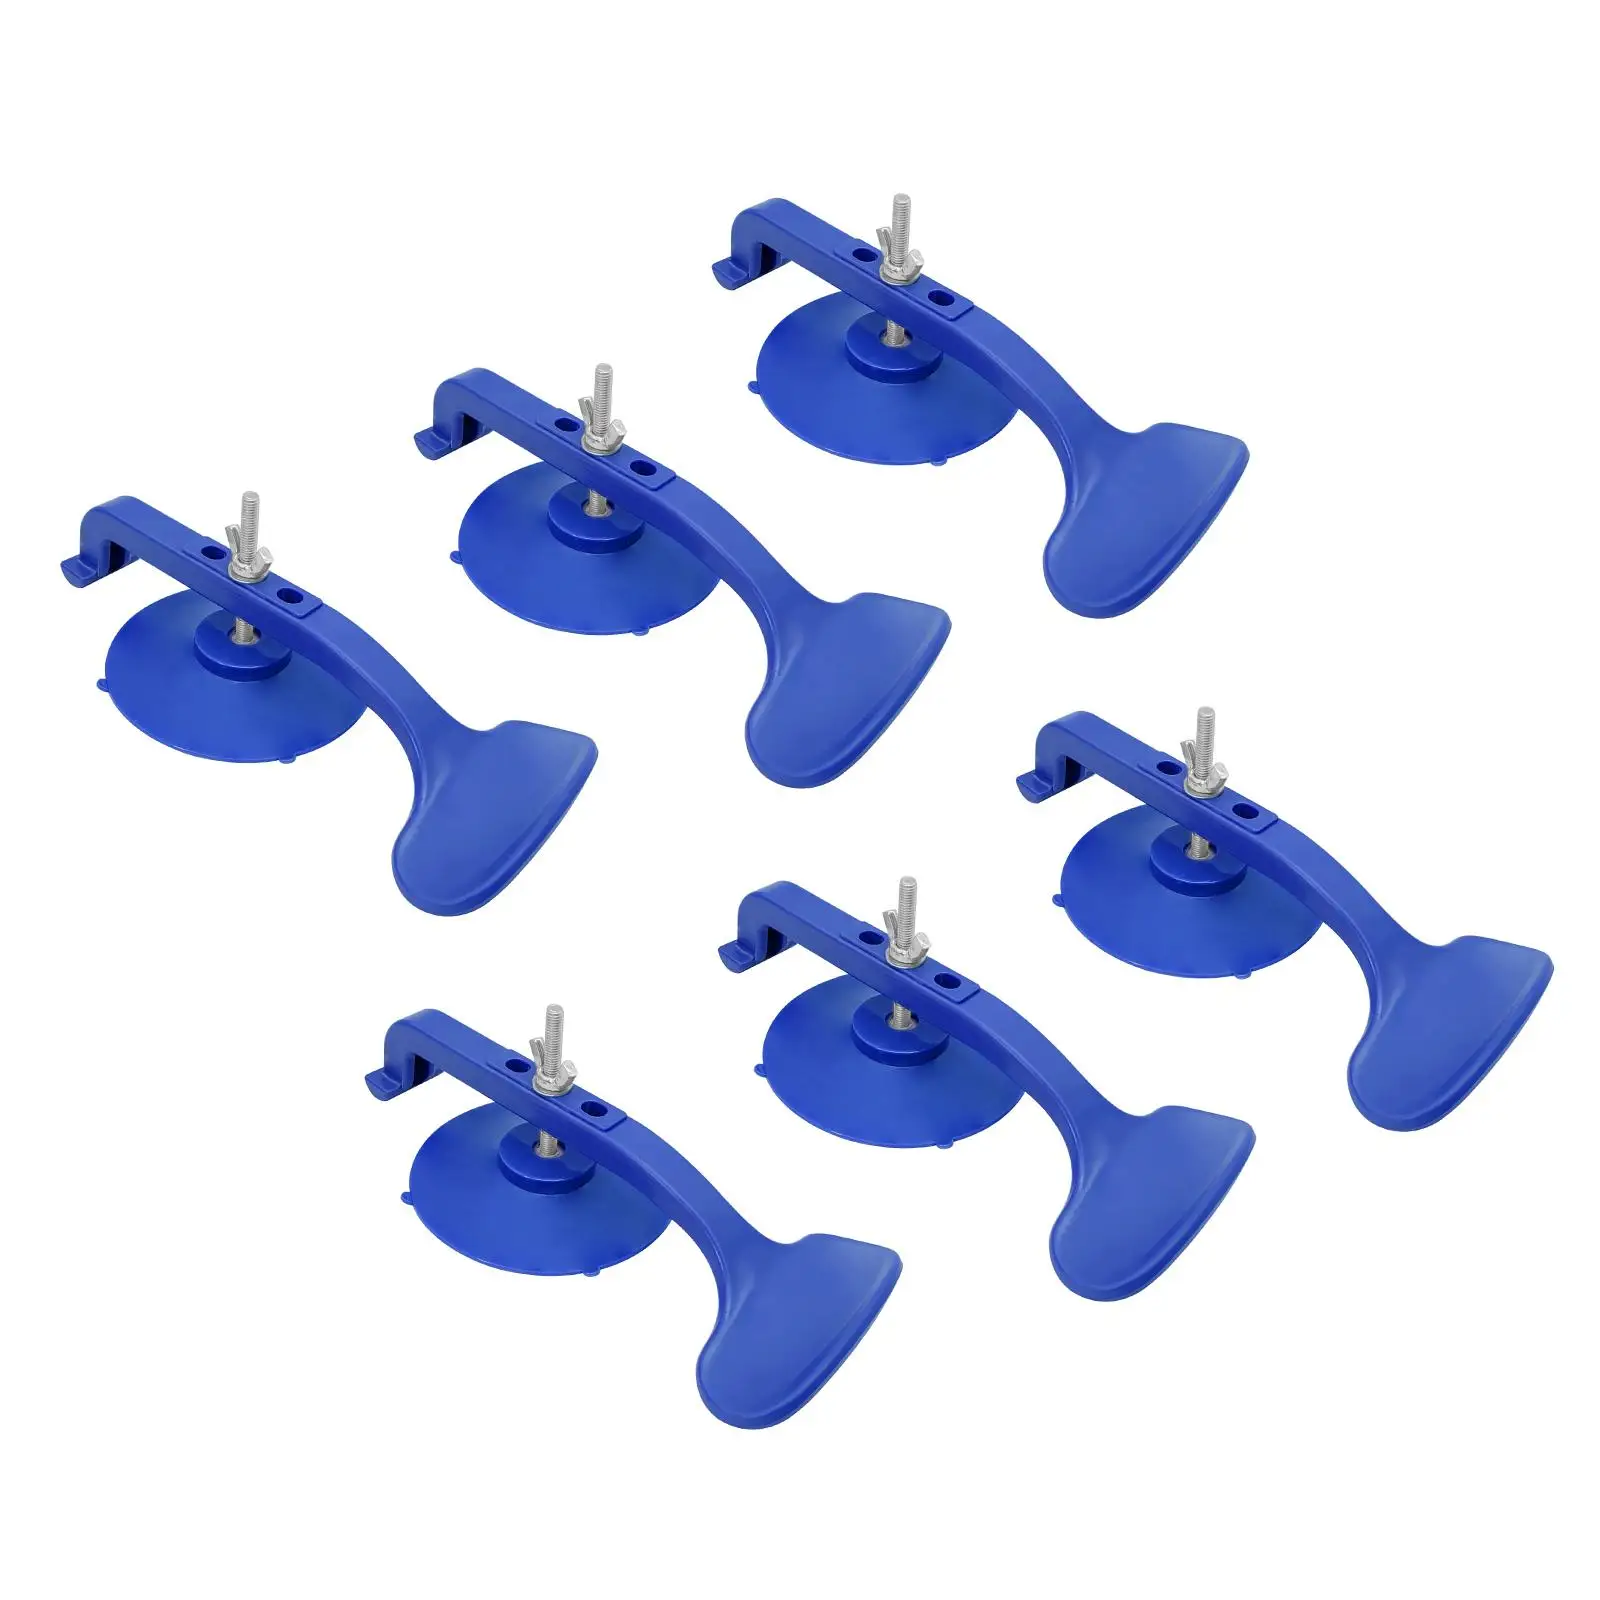 6 Pieces Practical Suction Clamp Set Adjustable for Convertible Glass Windshield Repair Blue Automotive or Home Repairs